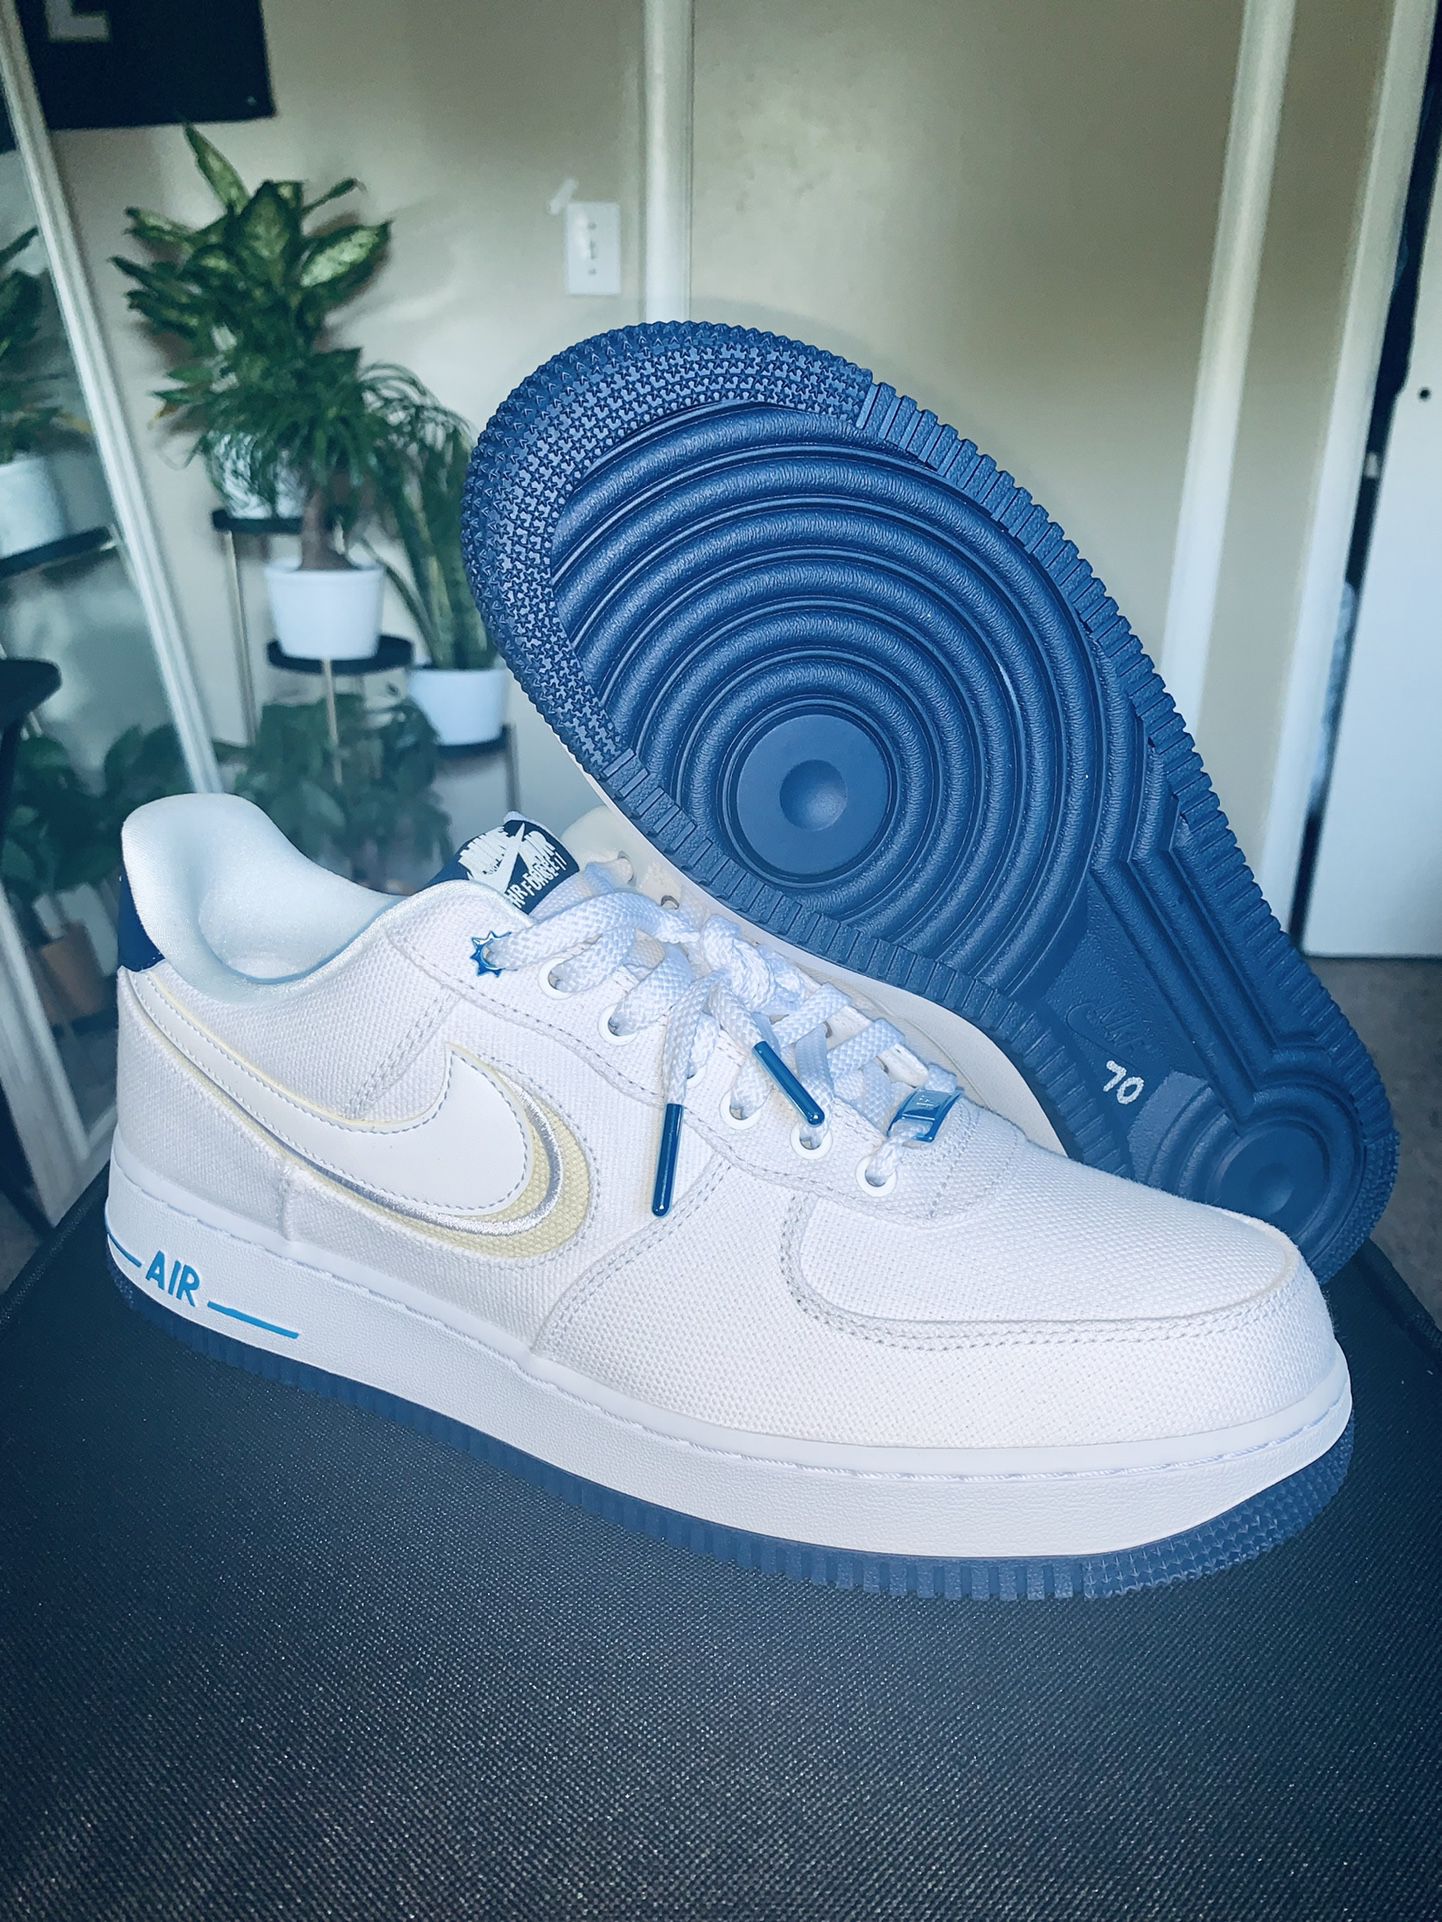 Nike Air Force 1 Premium White Fossil Blue Size 11.5